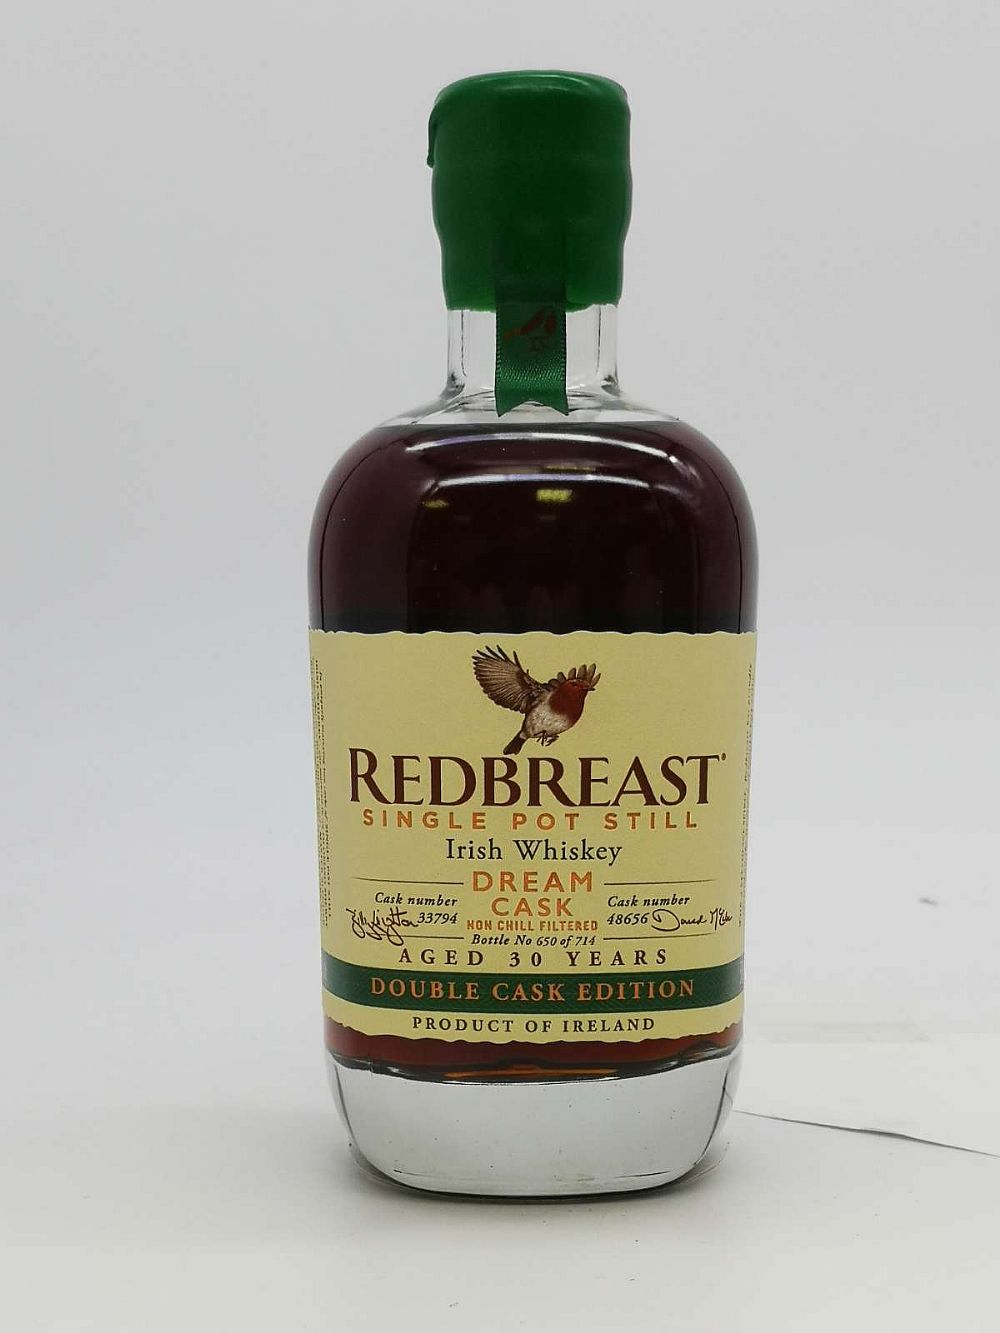 Redbreast Dream Cask 30 year old, Double Cask Edition